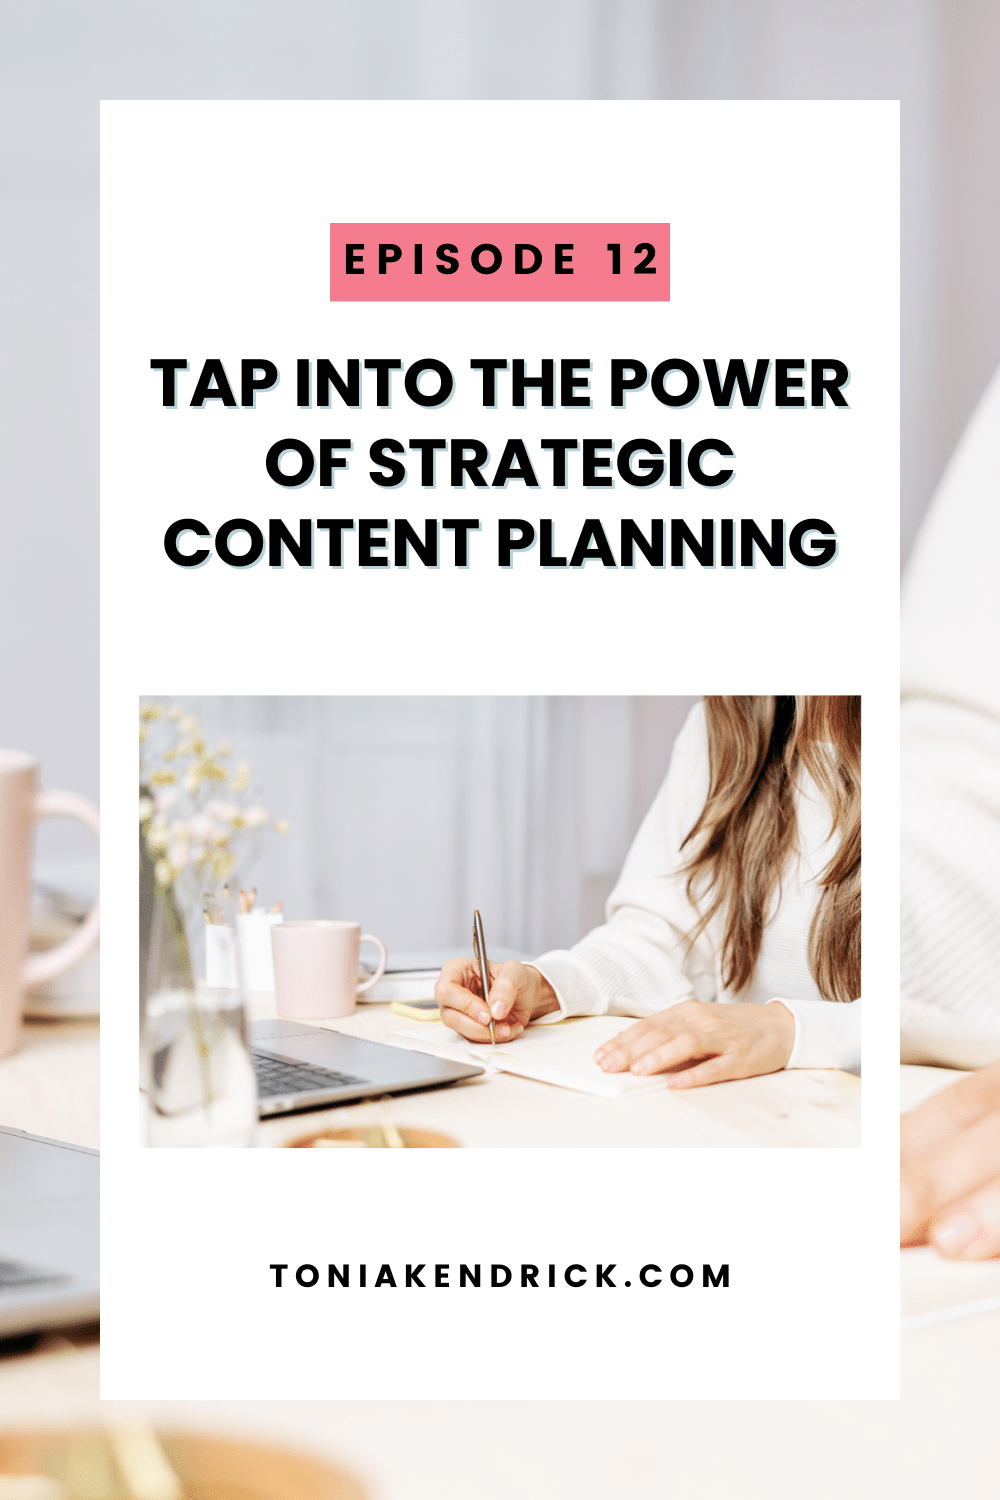 An entrepreneur brainstorming ideas for strategic content planning, with a focus on engaging her target audience.